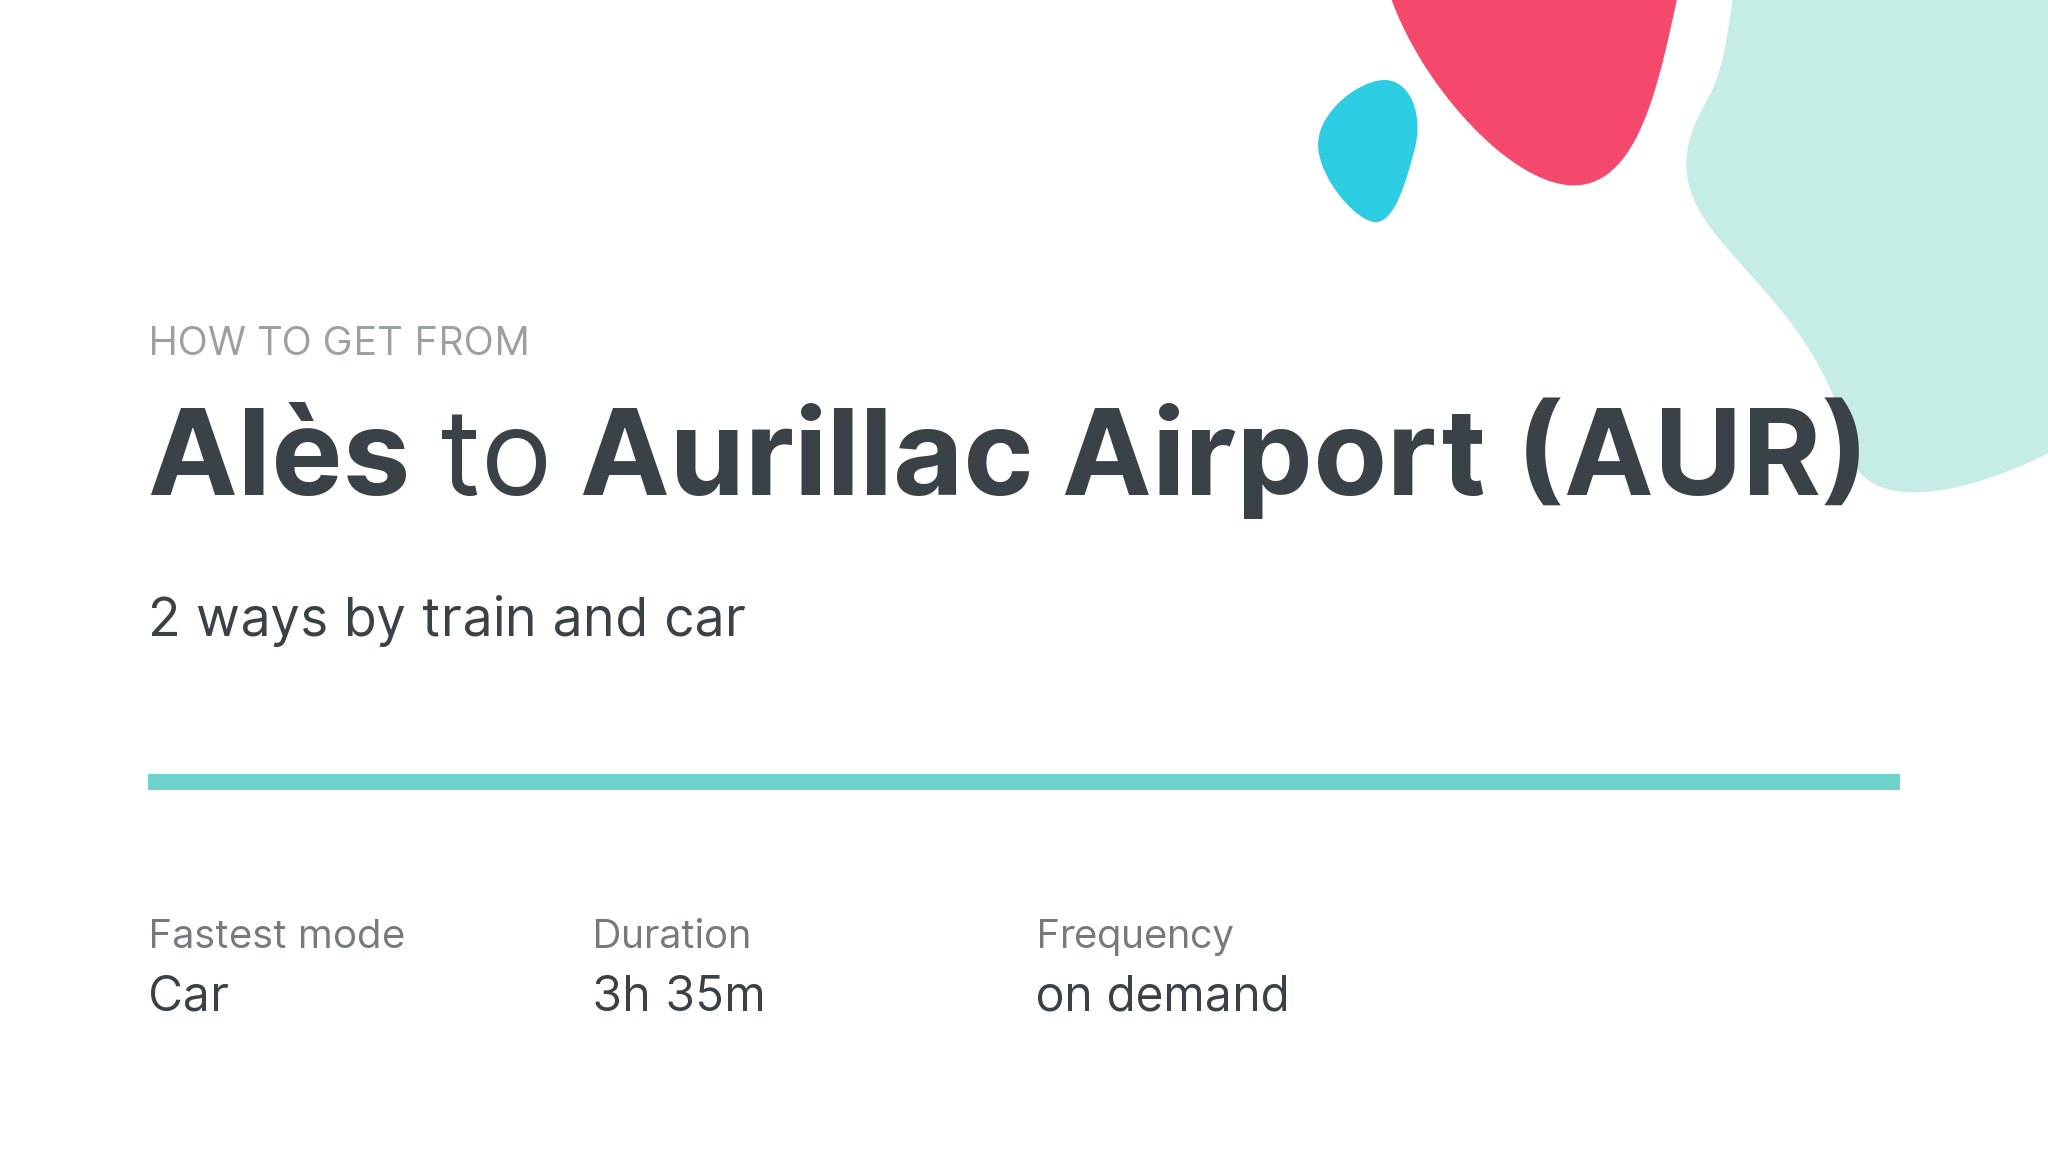 How do I get from Alès to Aurillac Airport (AUR)